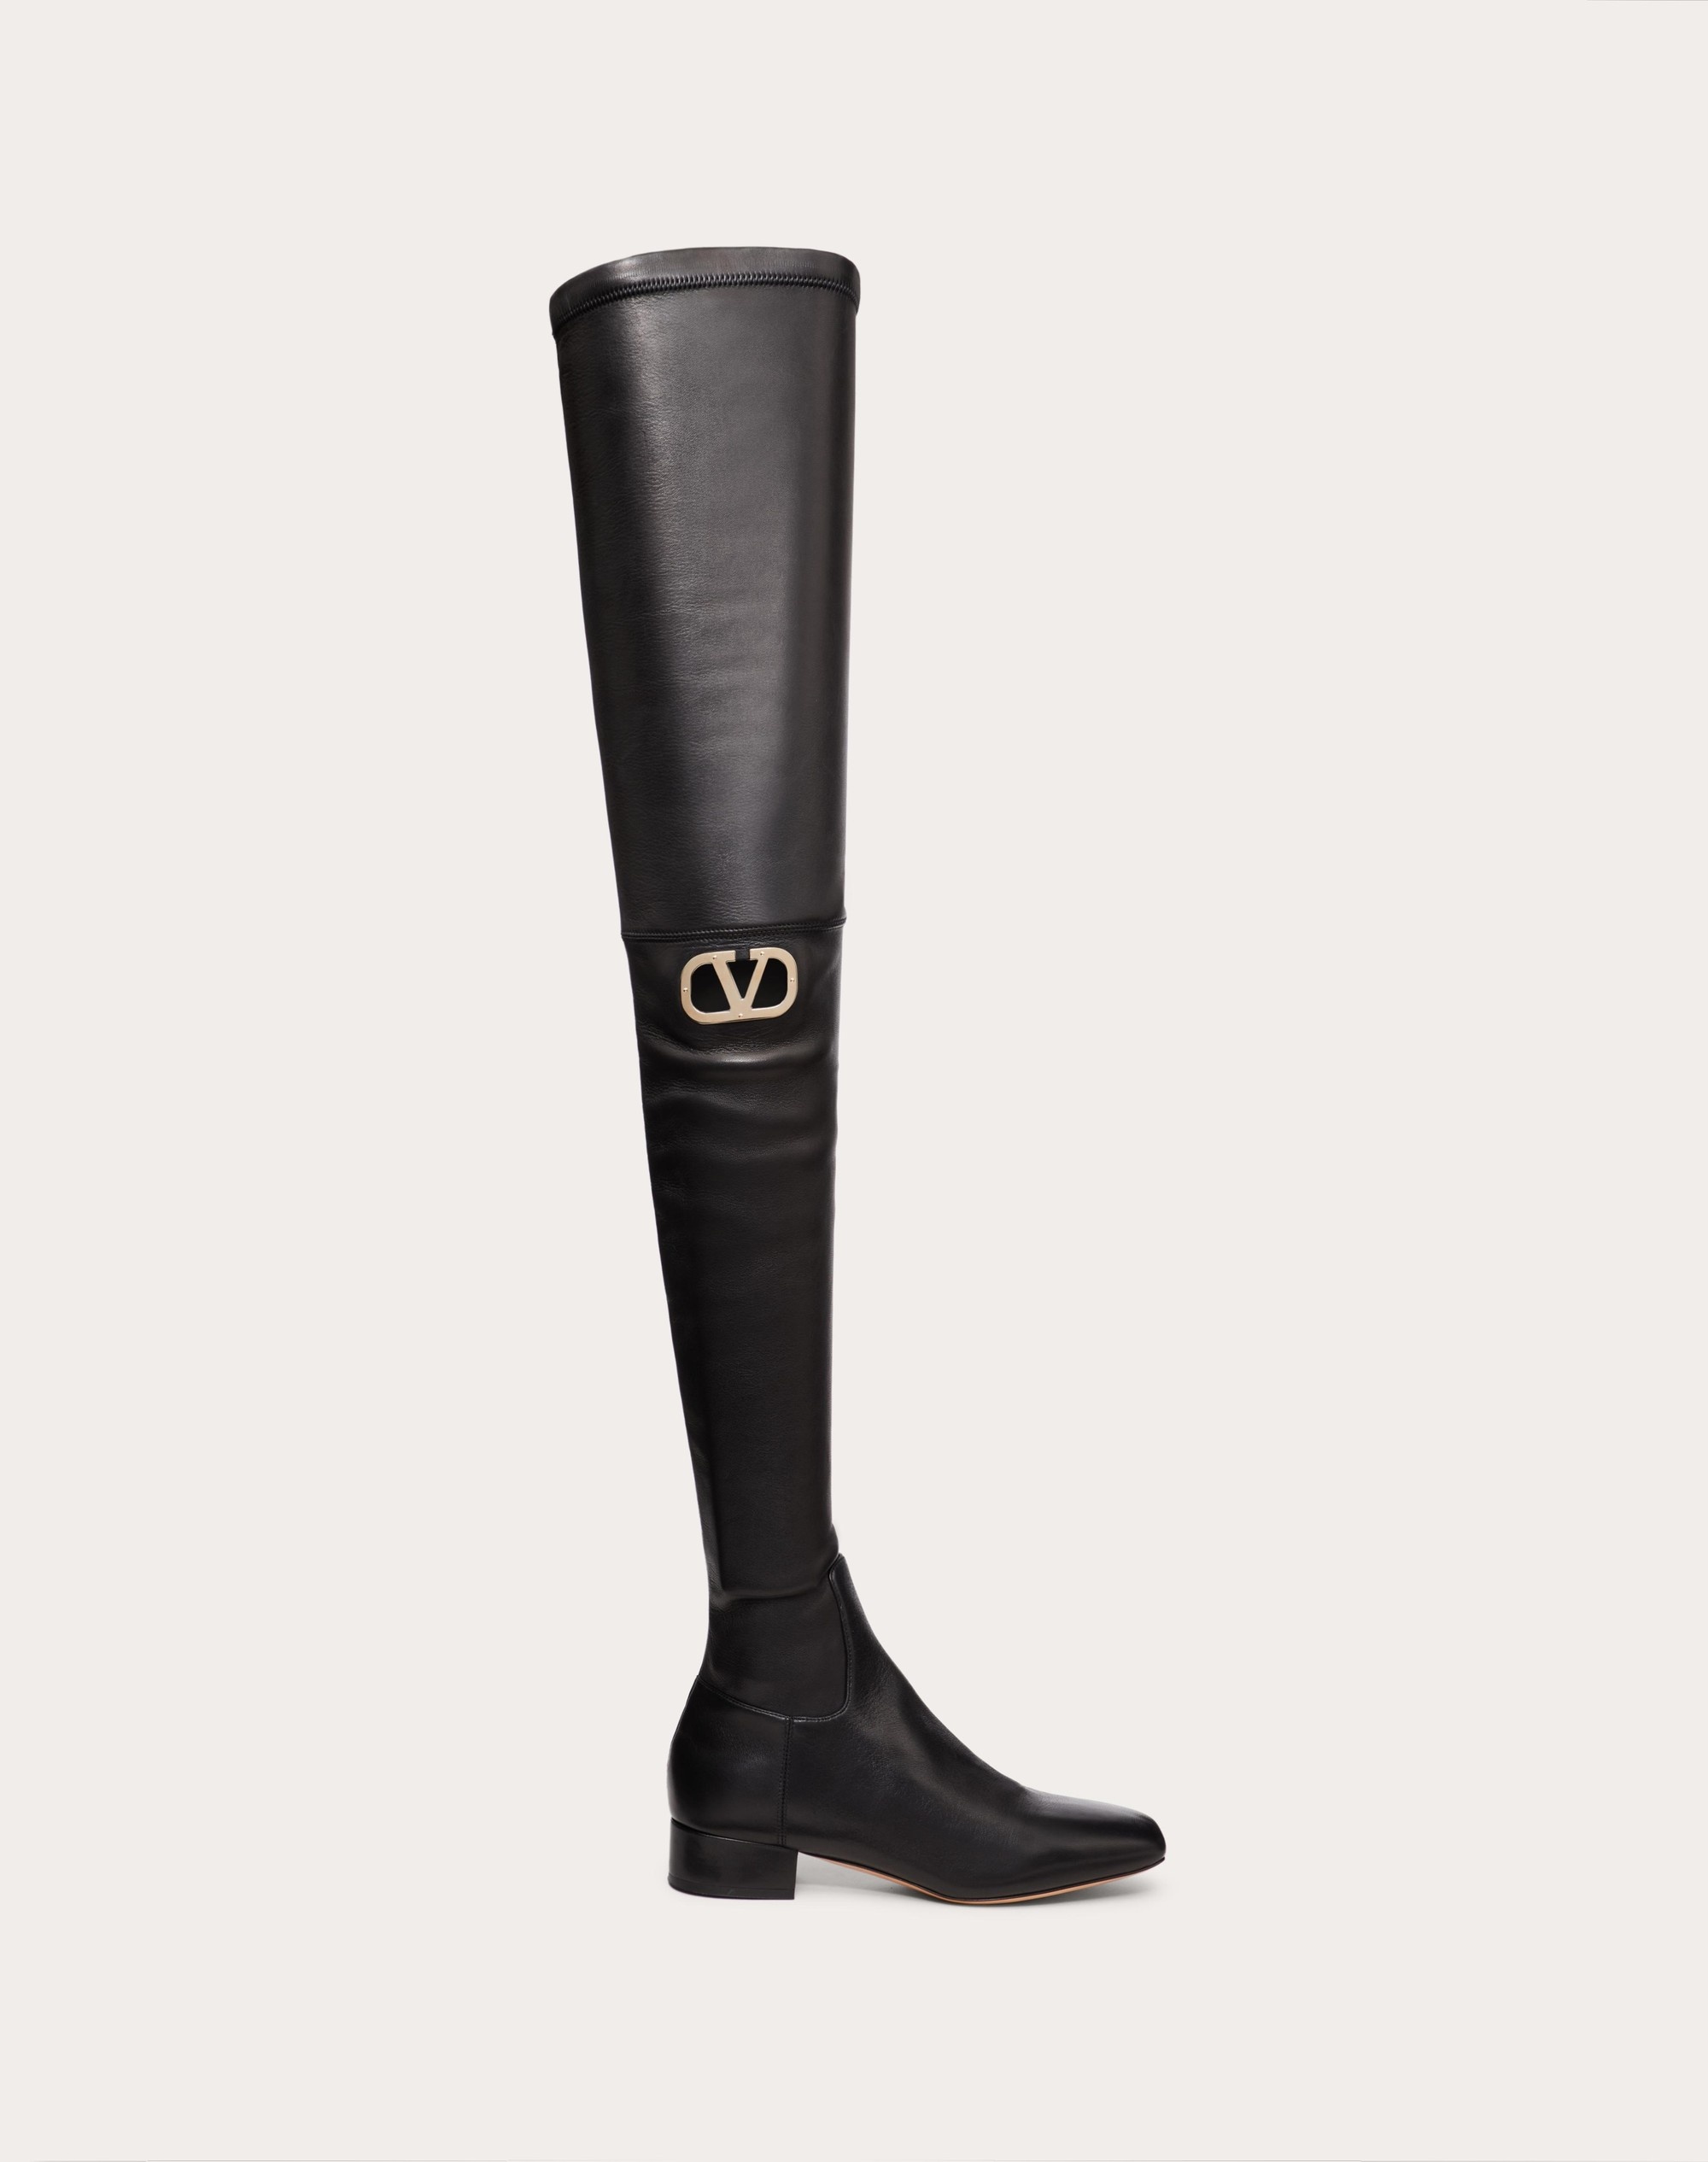 VLOGO TYPE OVER-THE-KNEE BOOT IN STRETCH NAPPA 30MM - 1